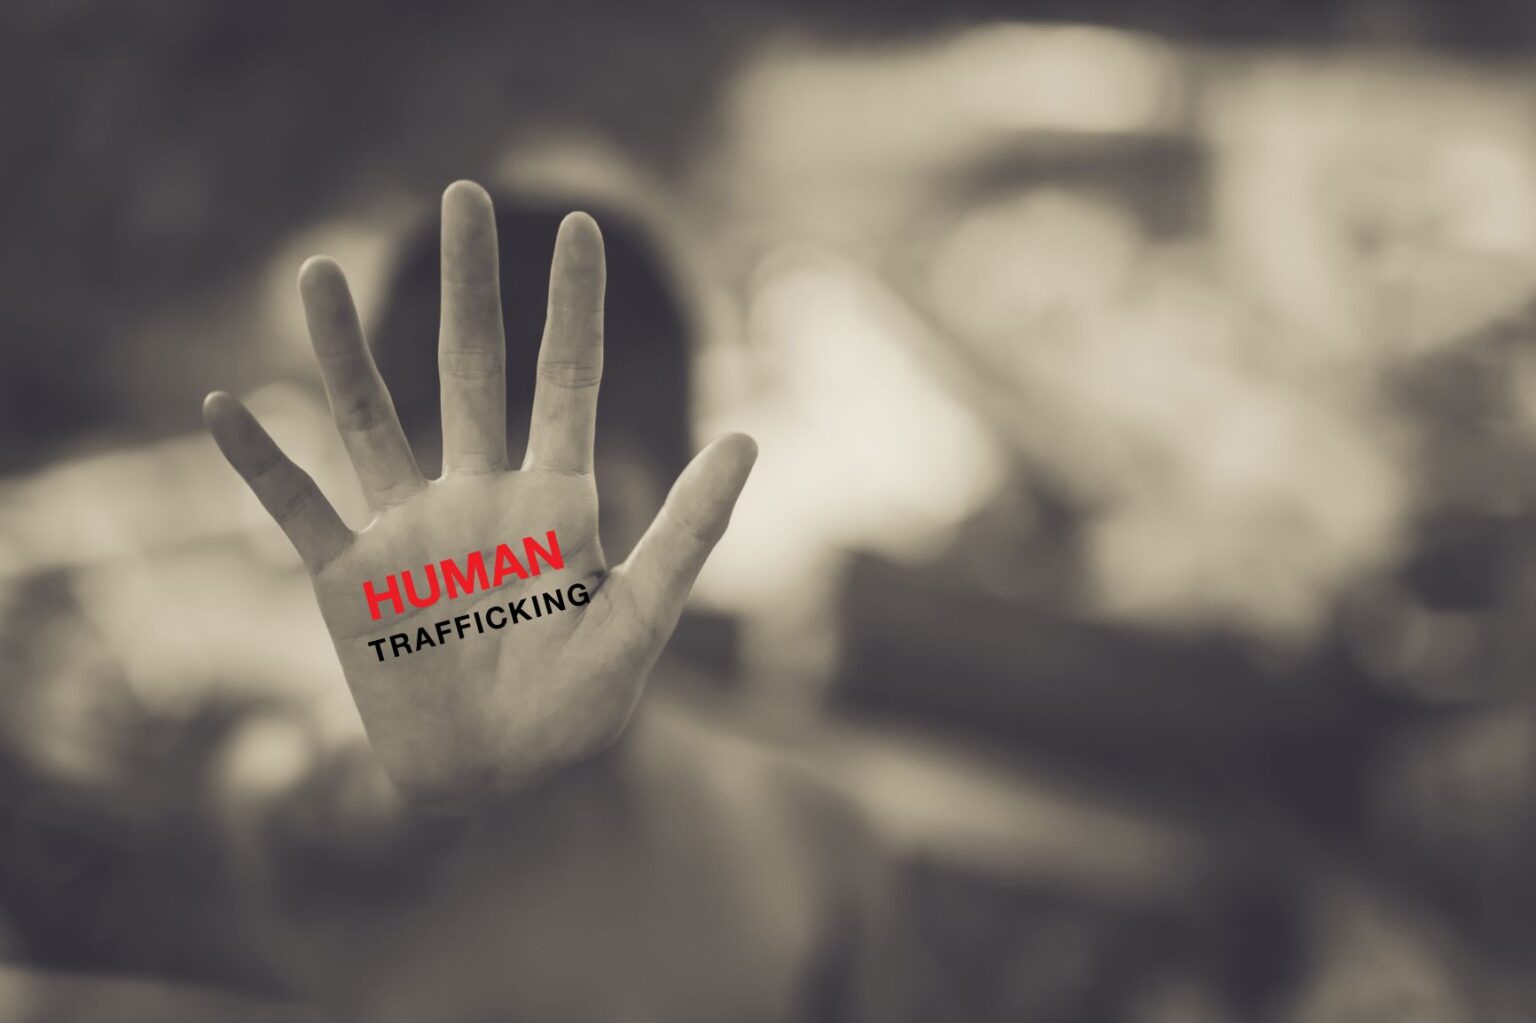 Against the day. World Day against Human trafficking. Halt картинки с рукой. July 30 is International Day against Human trafficking.